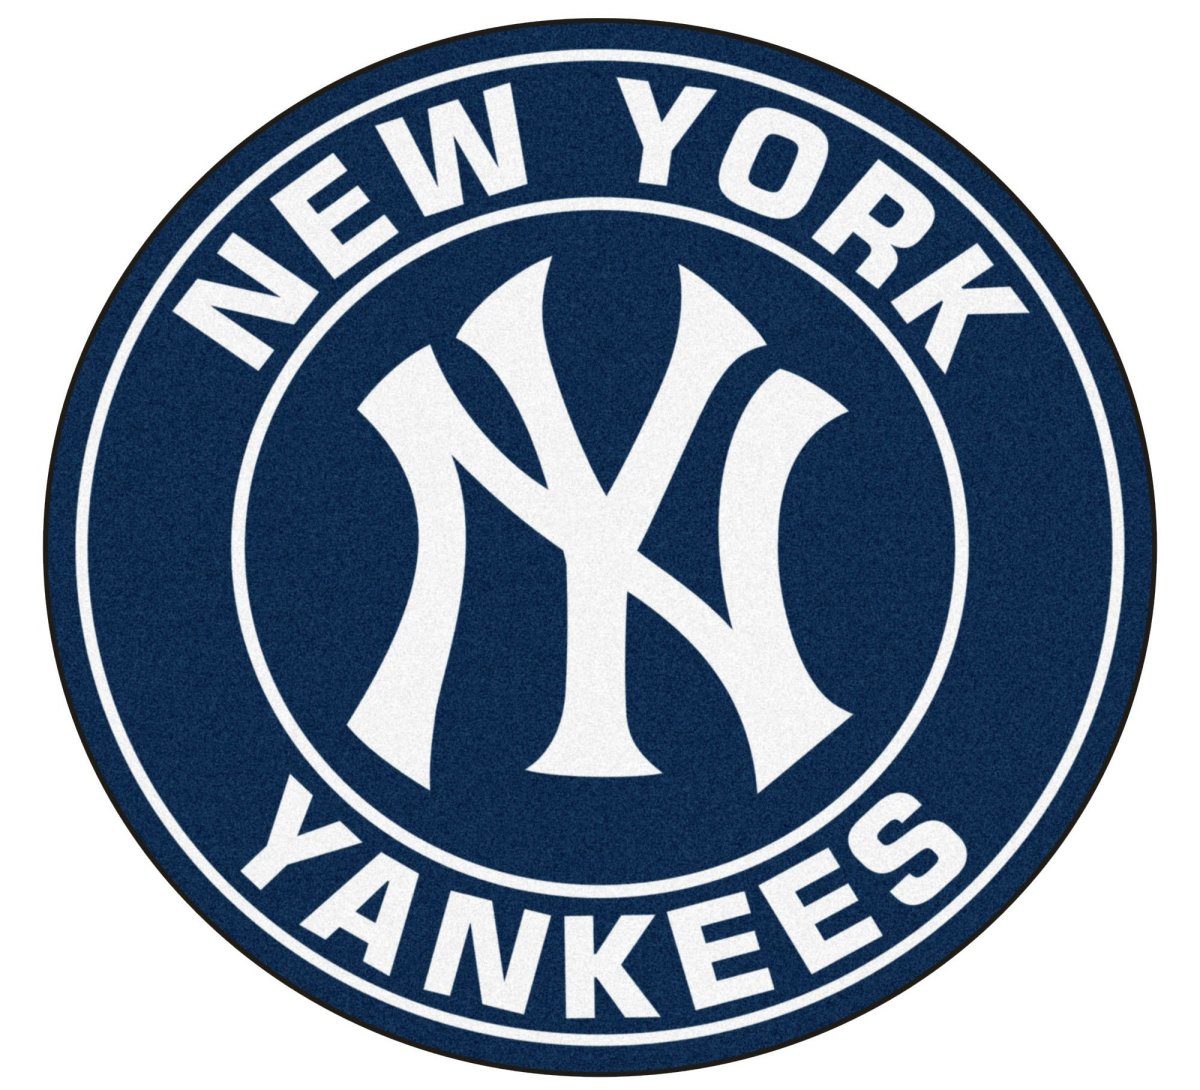 In 1952, the New York Yankees won the World Series.